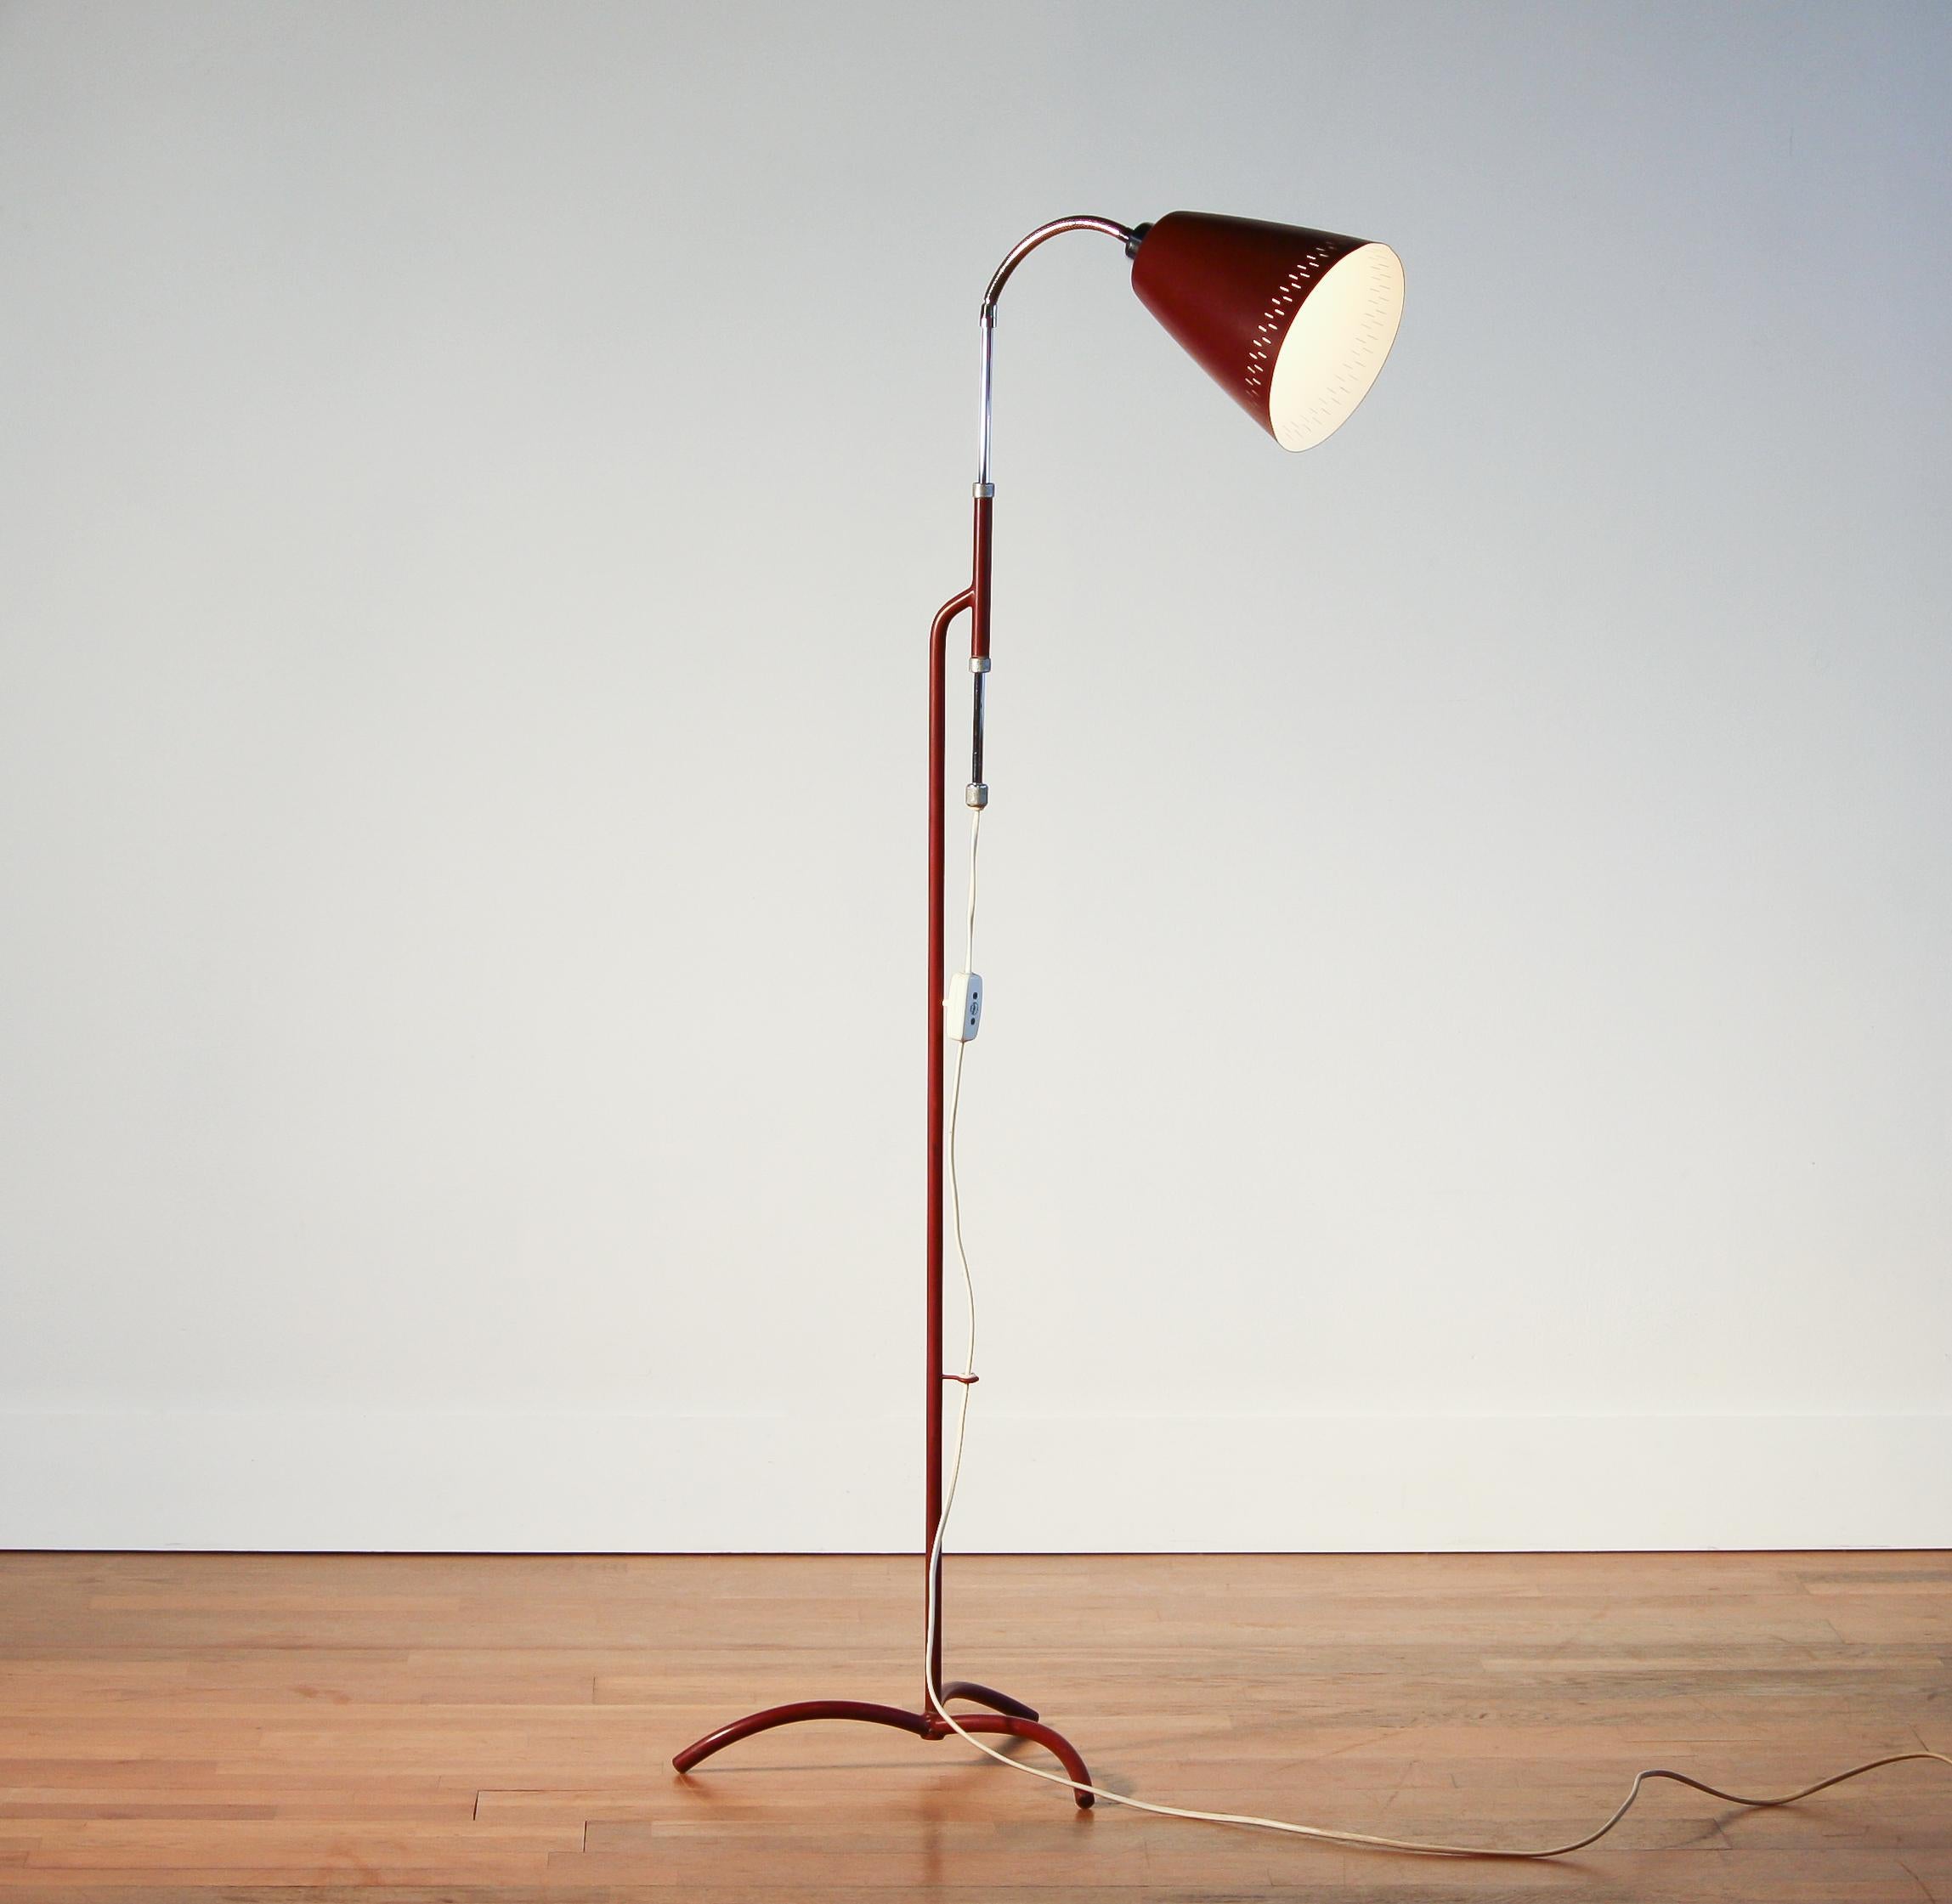 Beautiful red floor lamp designed by Hans Bergström, Sweden.
This lamp is made of metal with brass details and has a very rare stand.
It remains fully functional and in a nice condition.
Period 1950s.
Dimensions: H 154 cm, ø 18 cm.